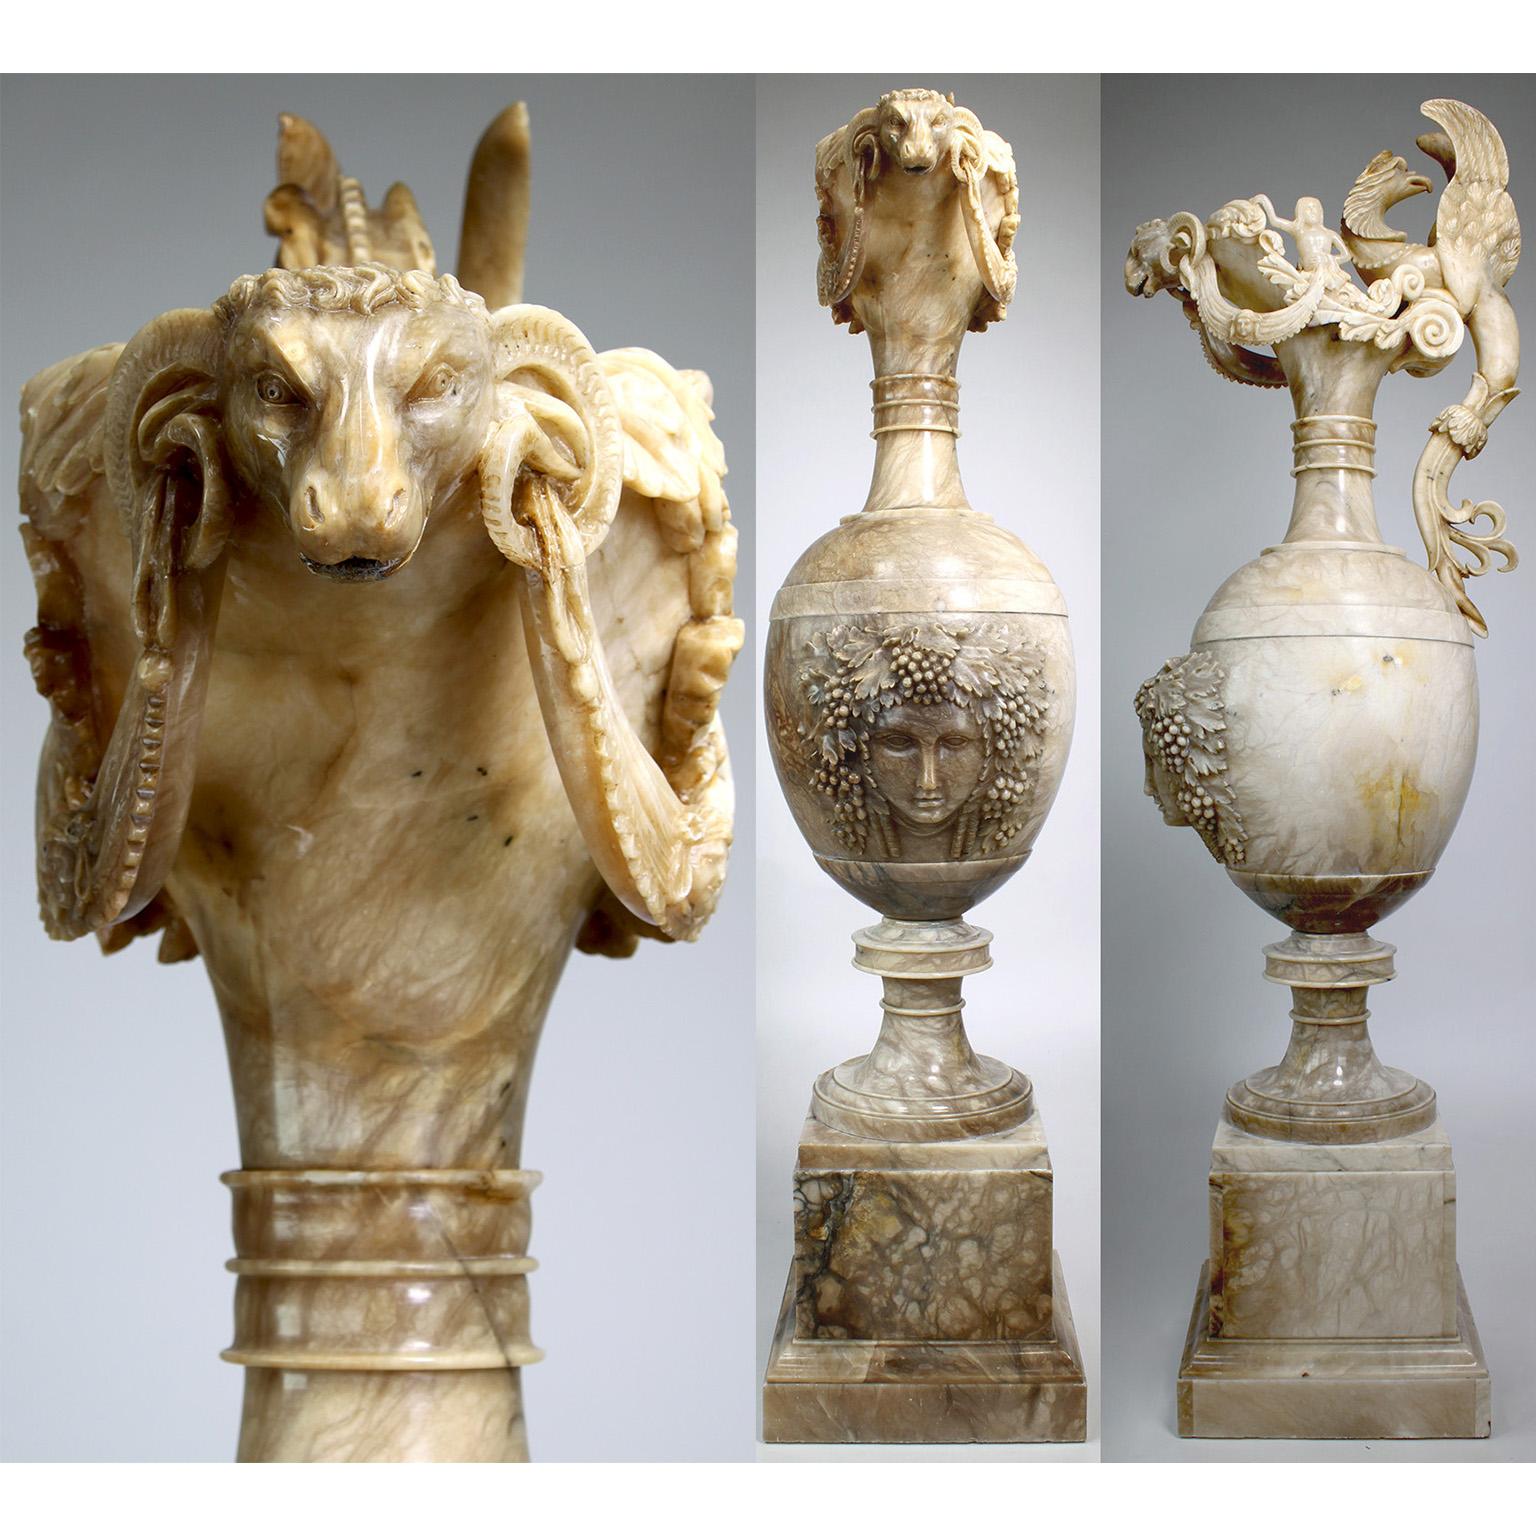 Hand-Carved Monumental Italian 19th Century Renaissance Revival Style Carved Alabaster Urn  For Sale